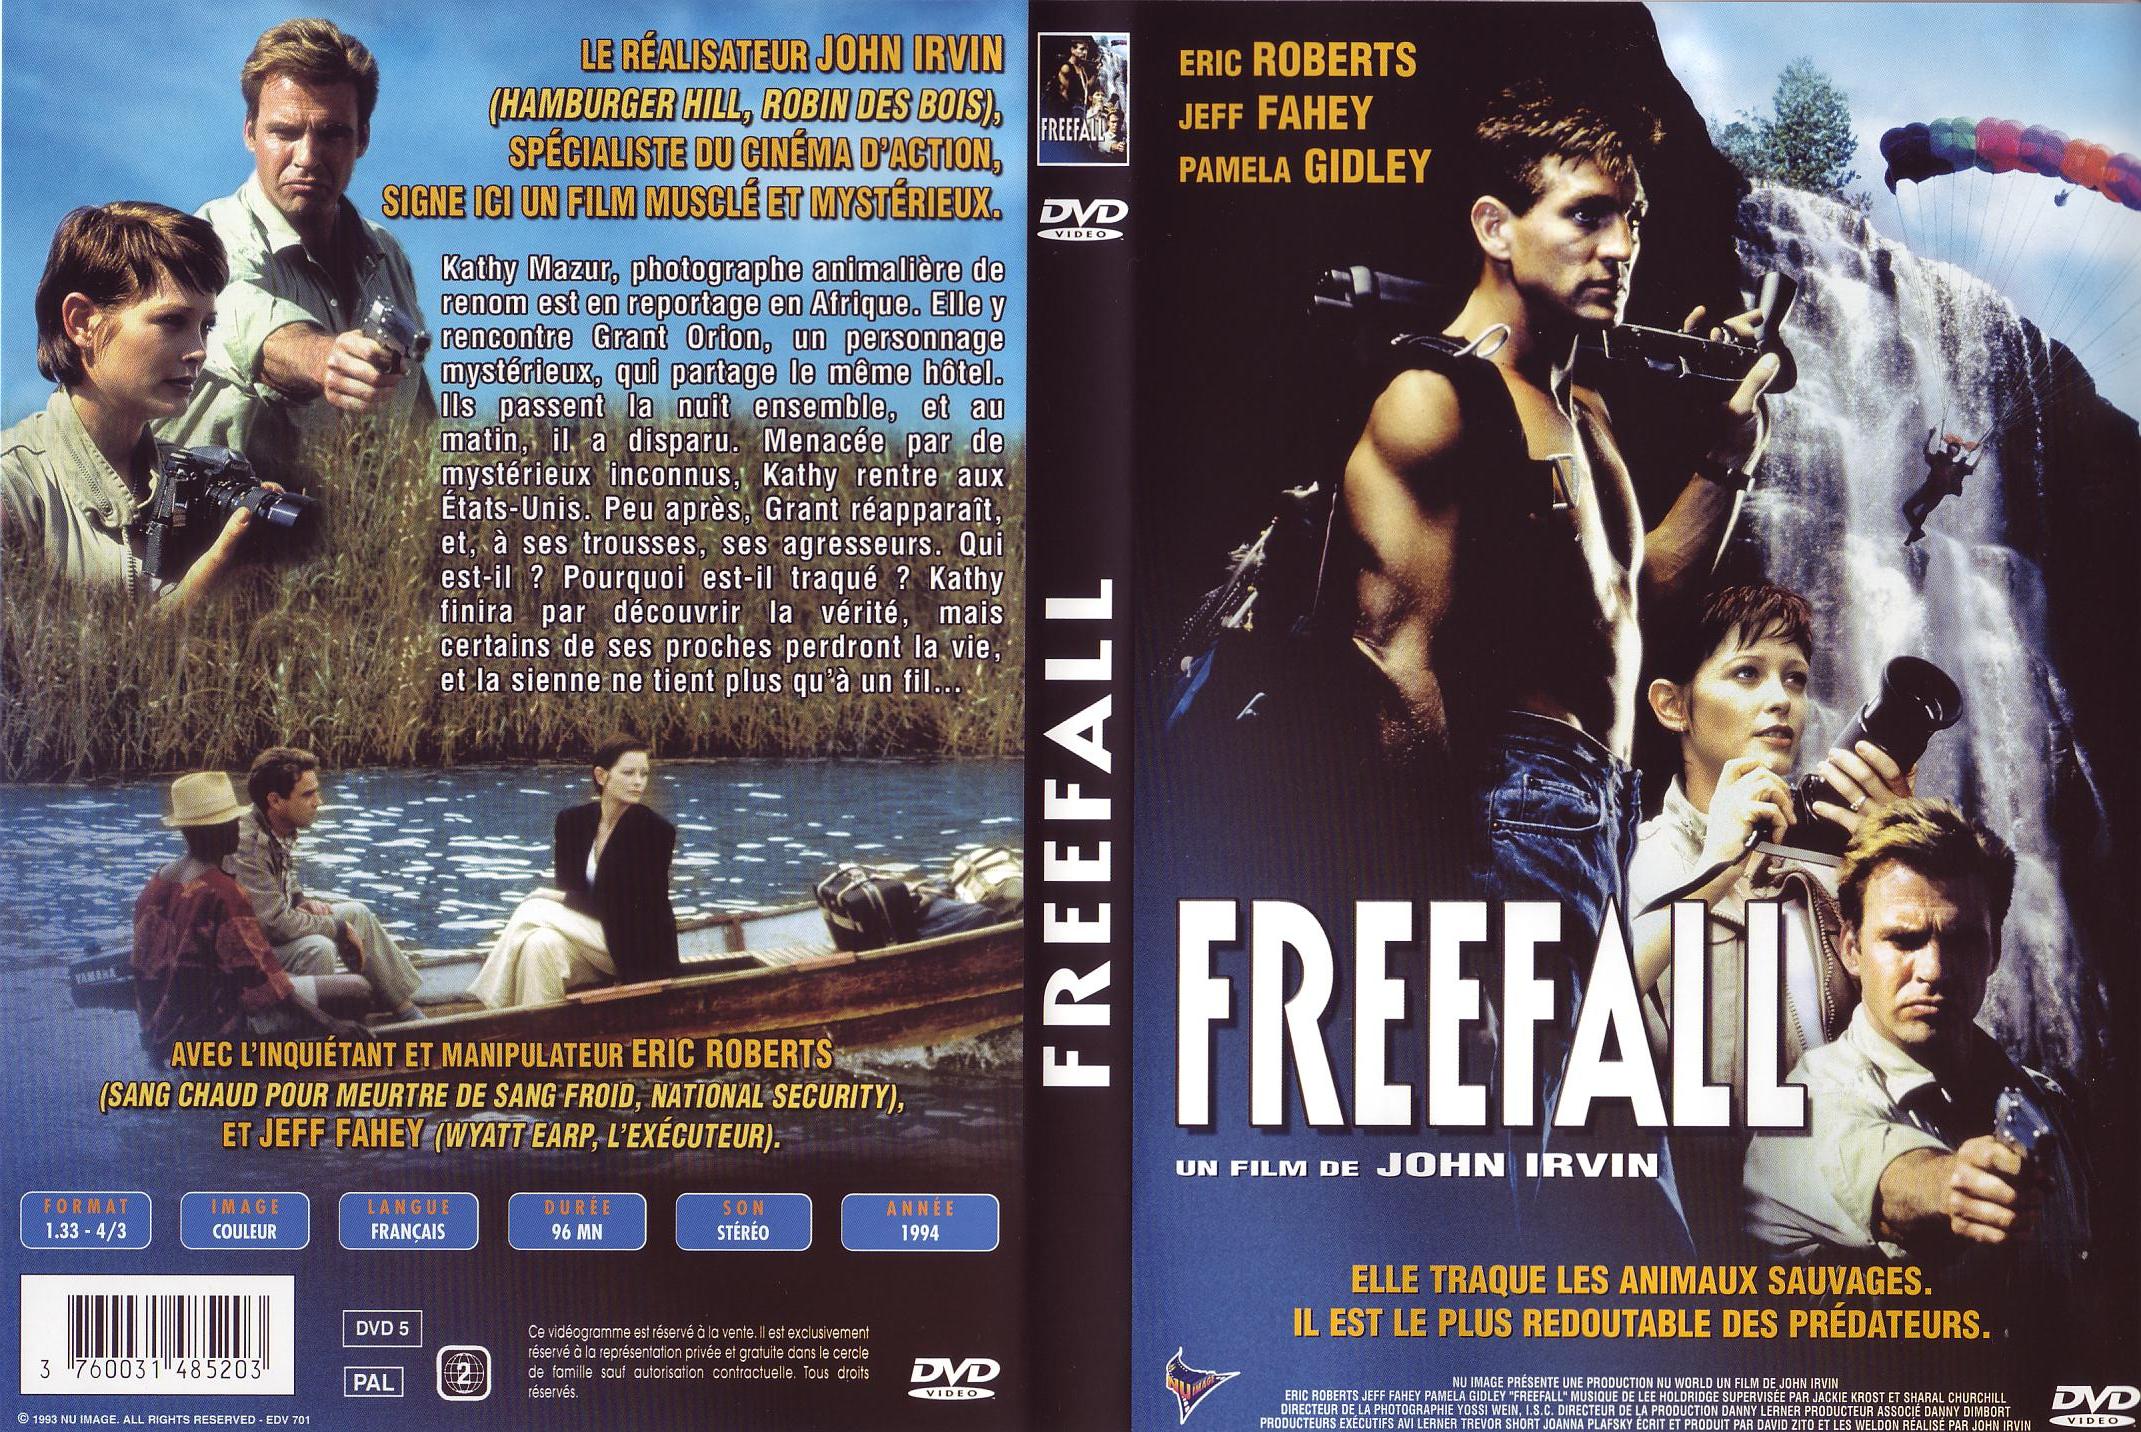 Jaquette DVD Freefall